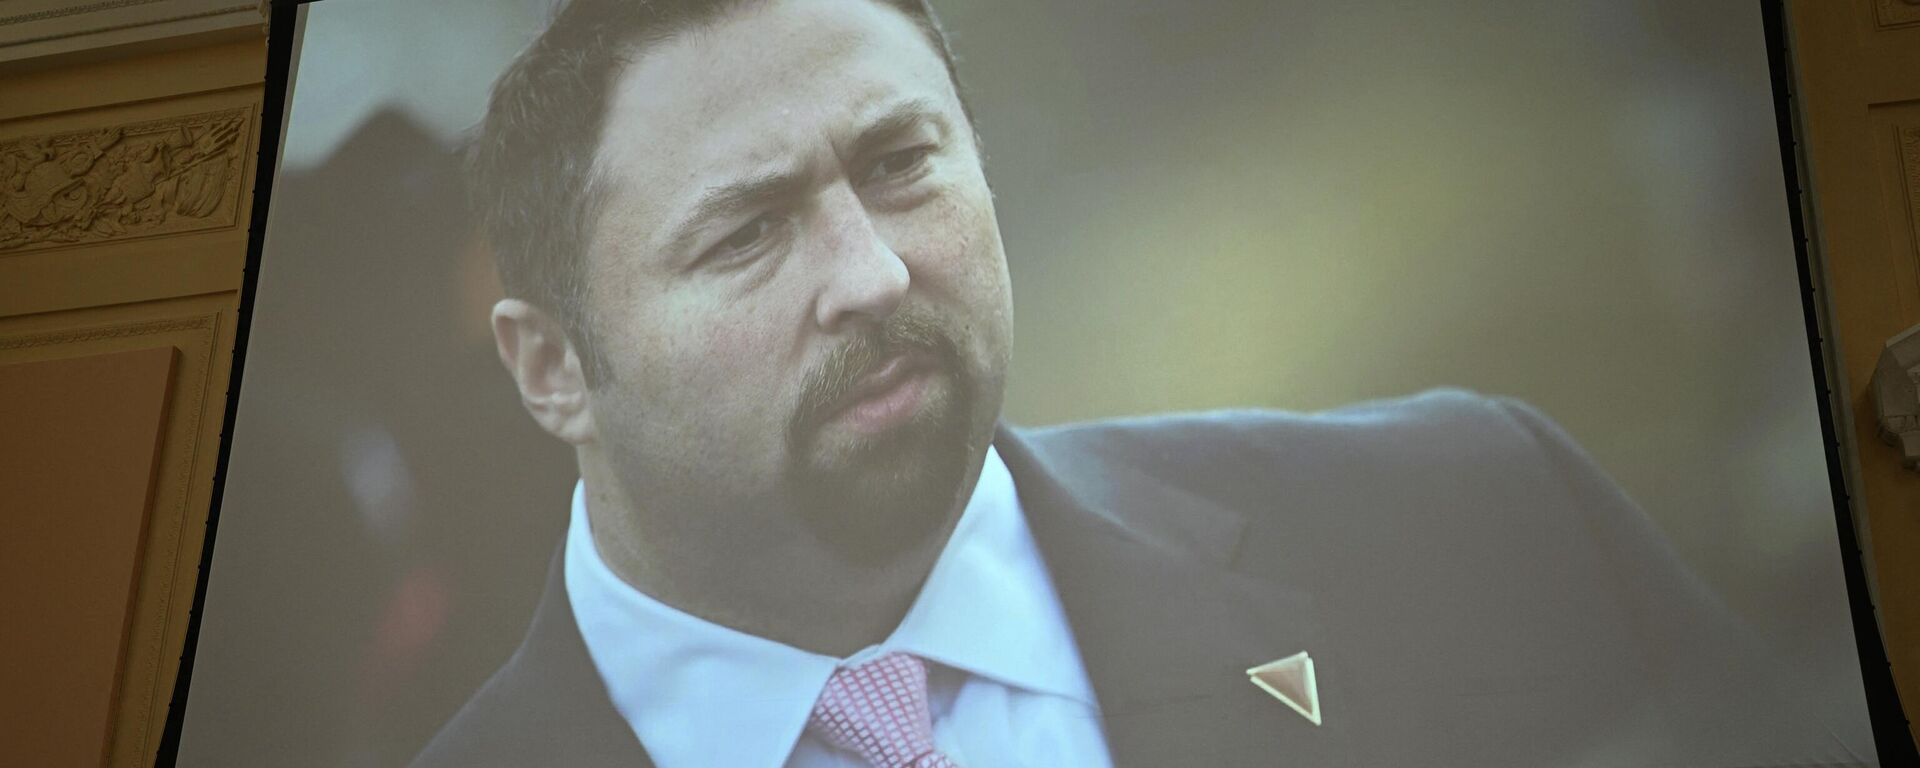 Jason Miller, former Trump campaign adviser, is seen onscreen during a House Select Committee hearing to Investigate the January 6th Attack on the US Capitol, in the Cannon House Office Building on Capitol Hill in Washington, DC on June 9, 2022.  - Sputnik International, 1920, 10.06.2022